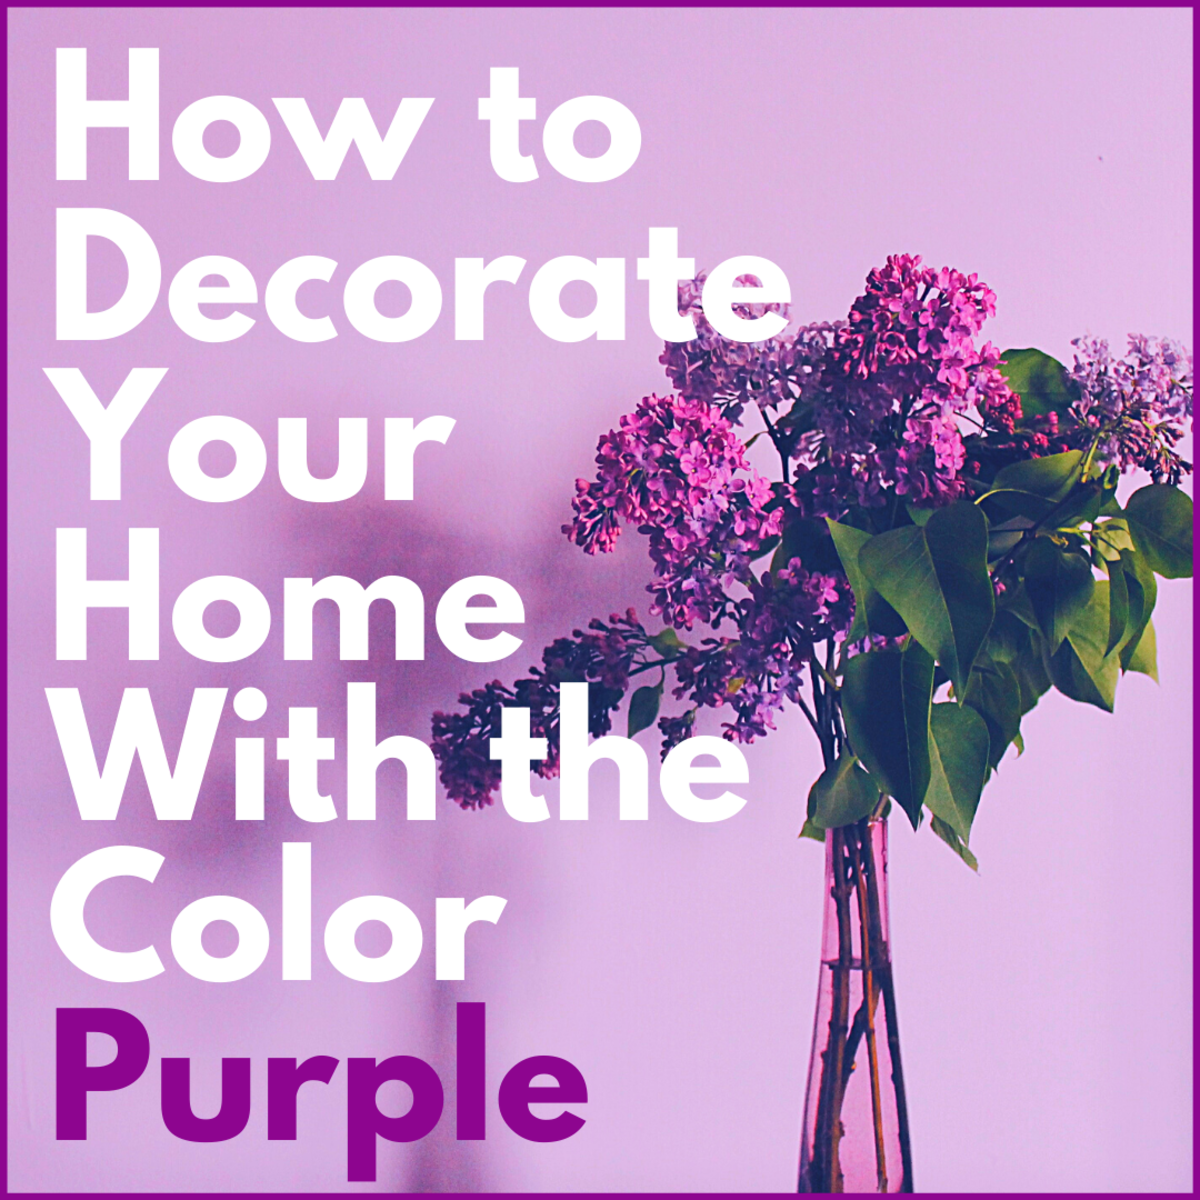 Decorating With the Color Purple